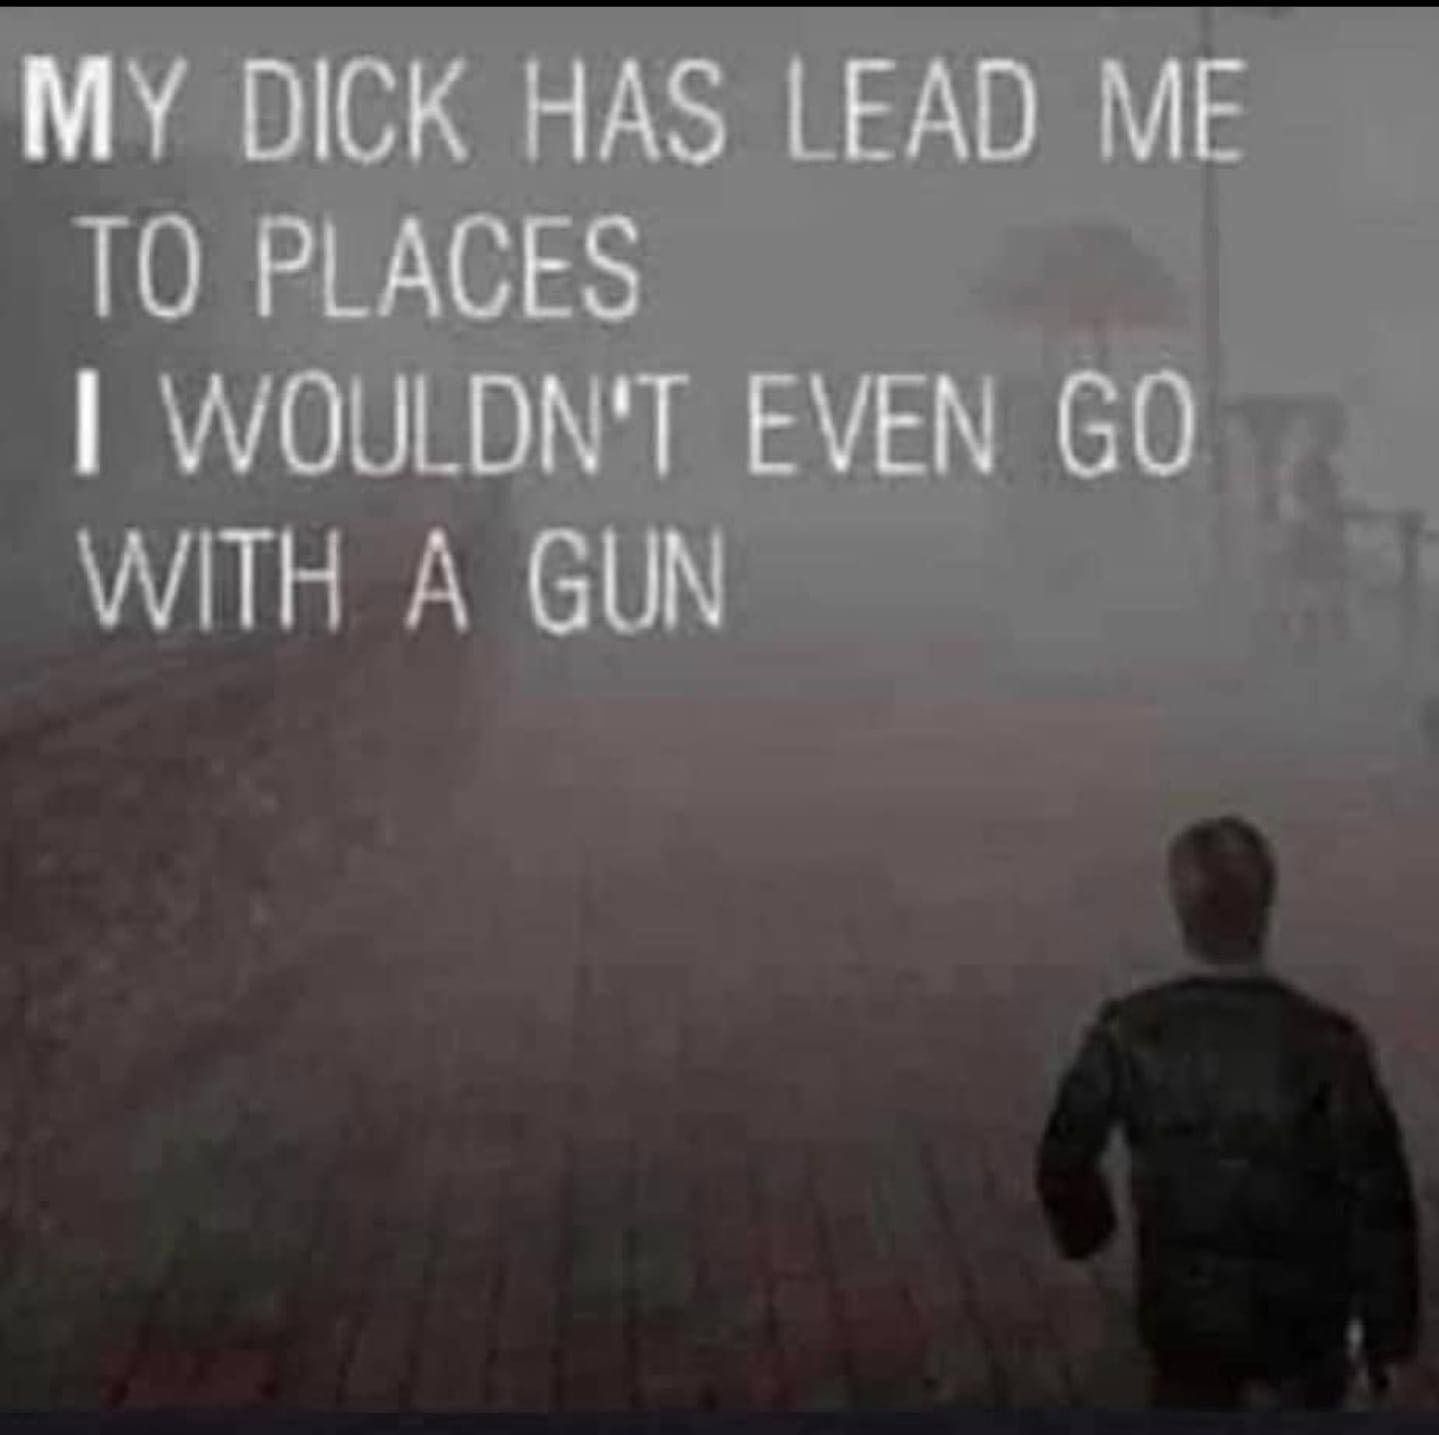 MY DICK HAS LEAD ME
TO PLACES
I WOULDN'T EVEN GO
WITH A GUN